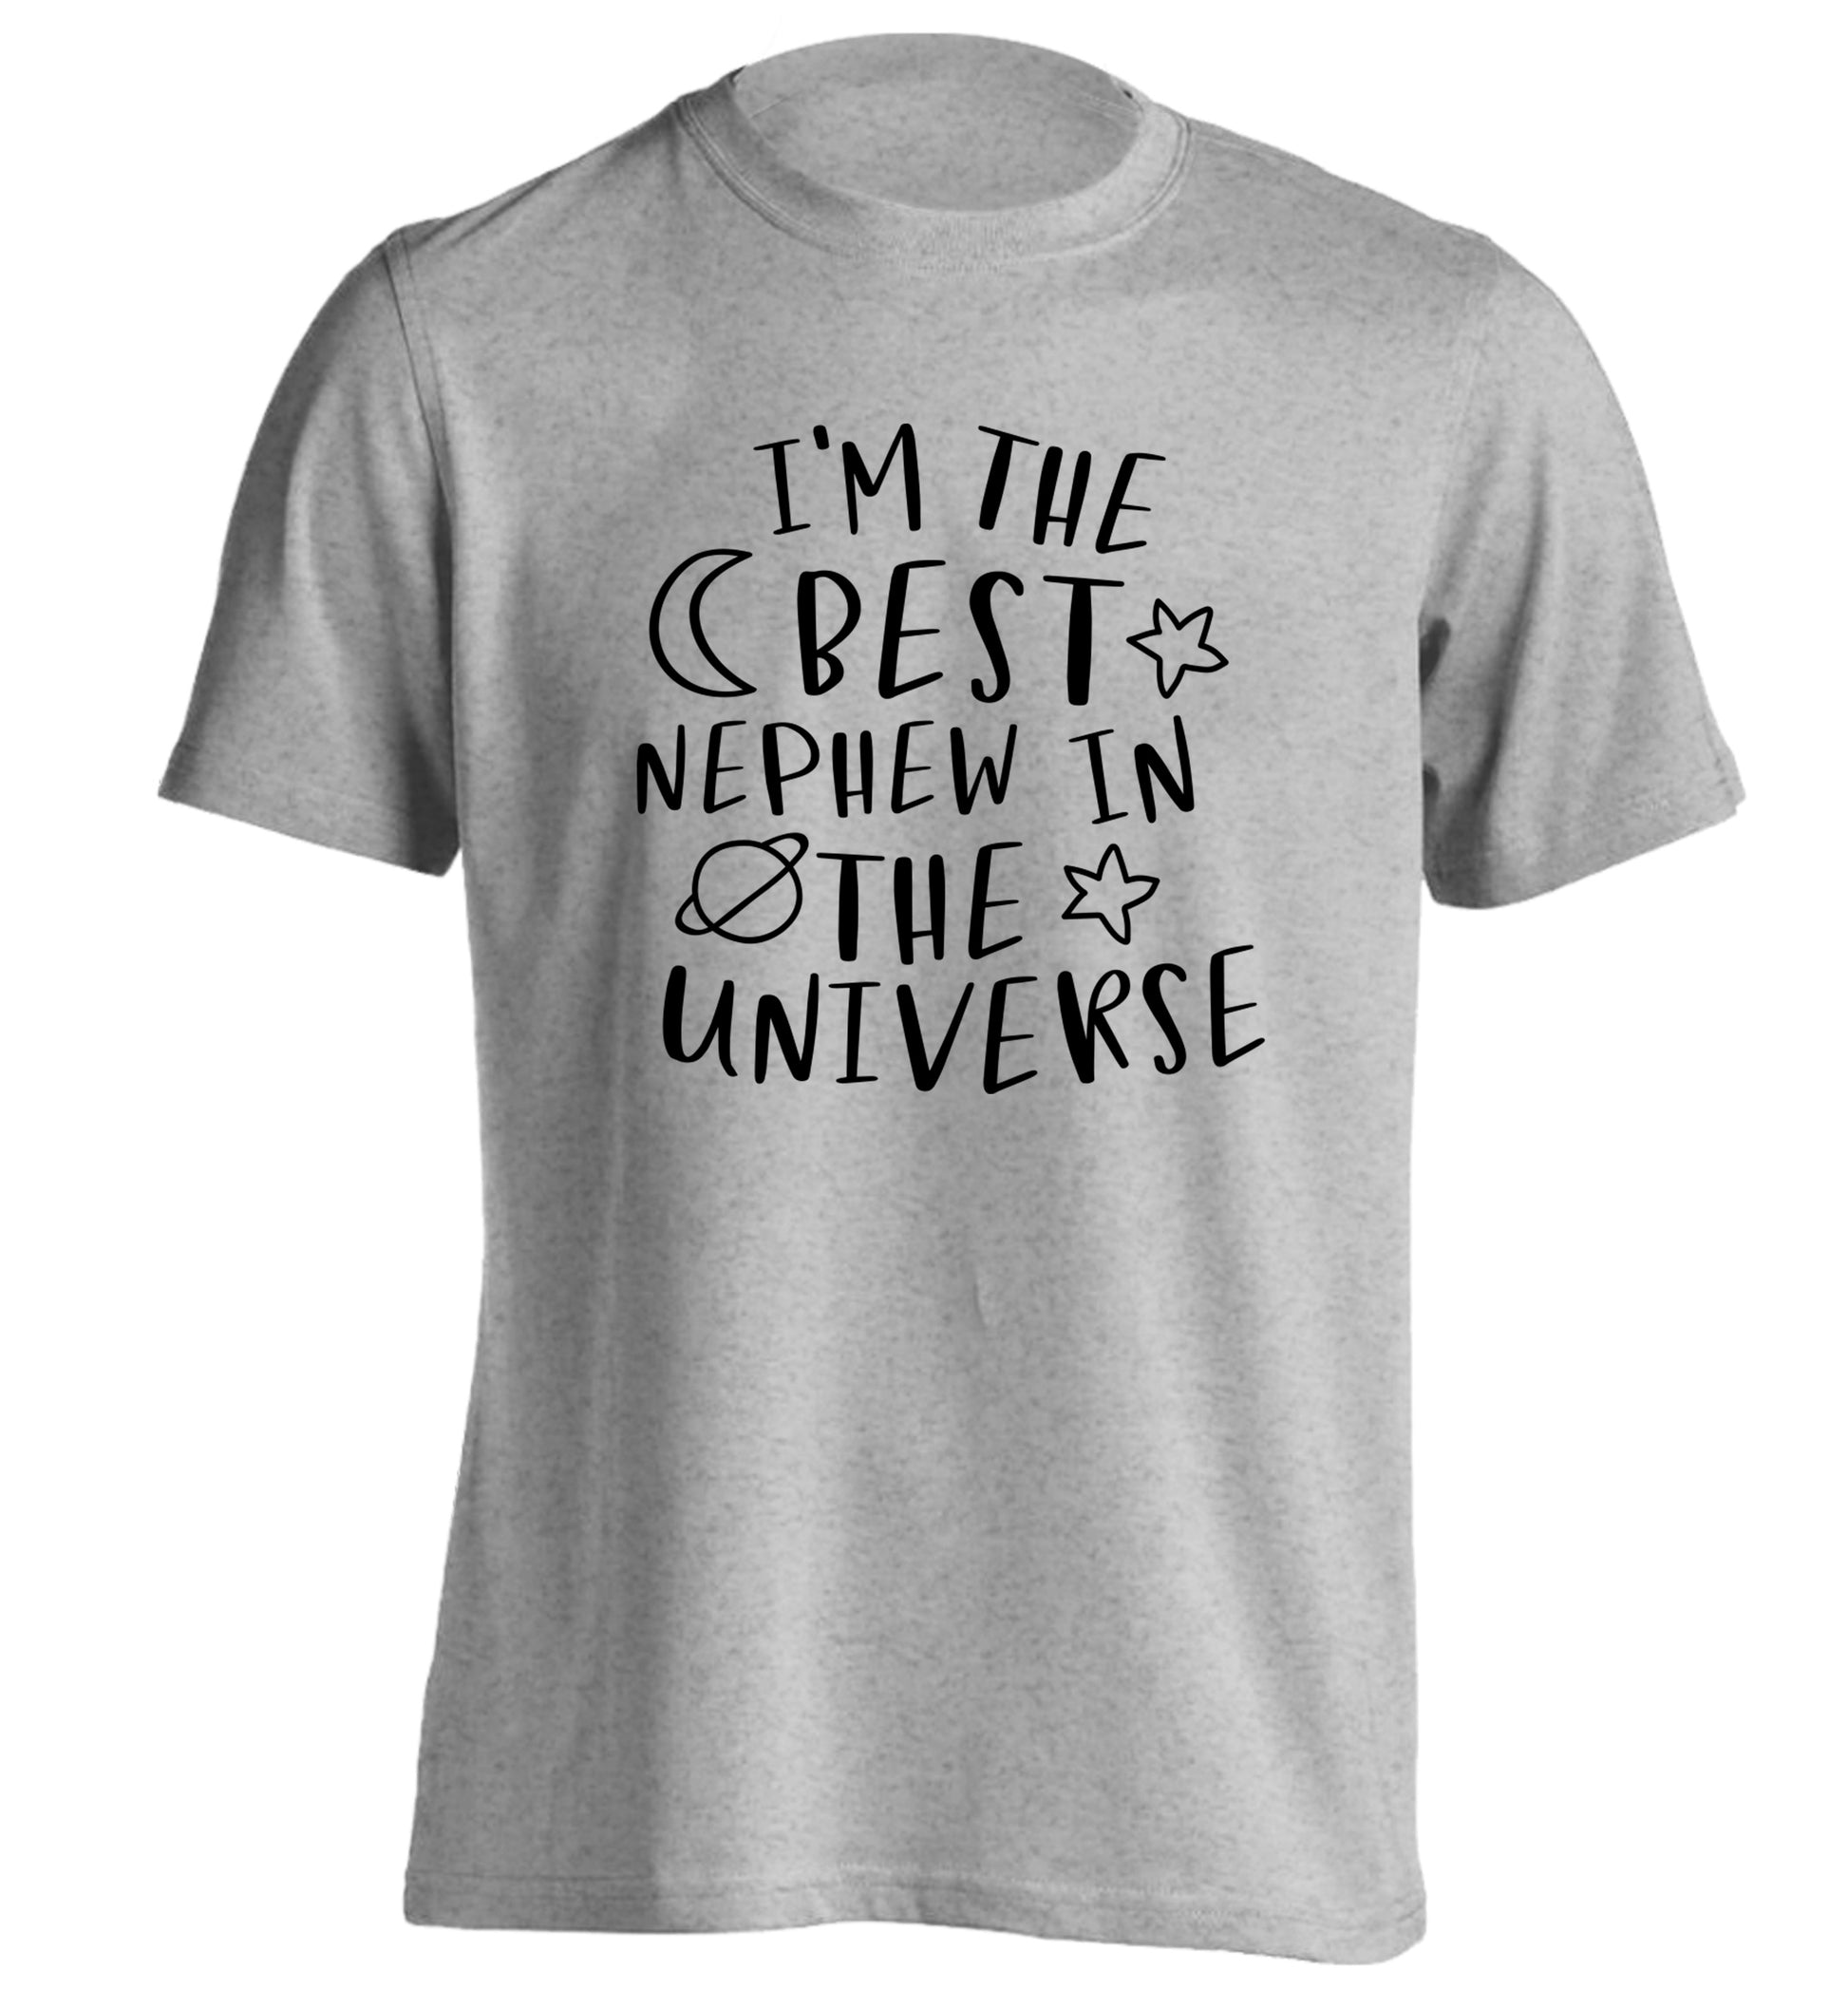 I'm the best nephew in the universe adults unisex grey Tshirt 2XL